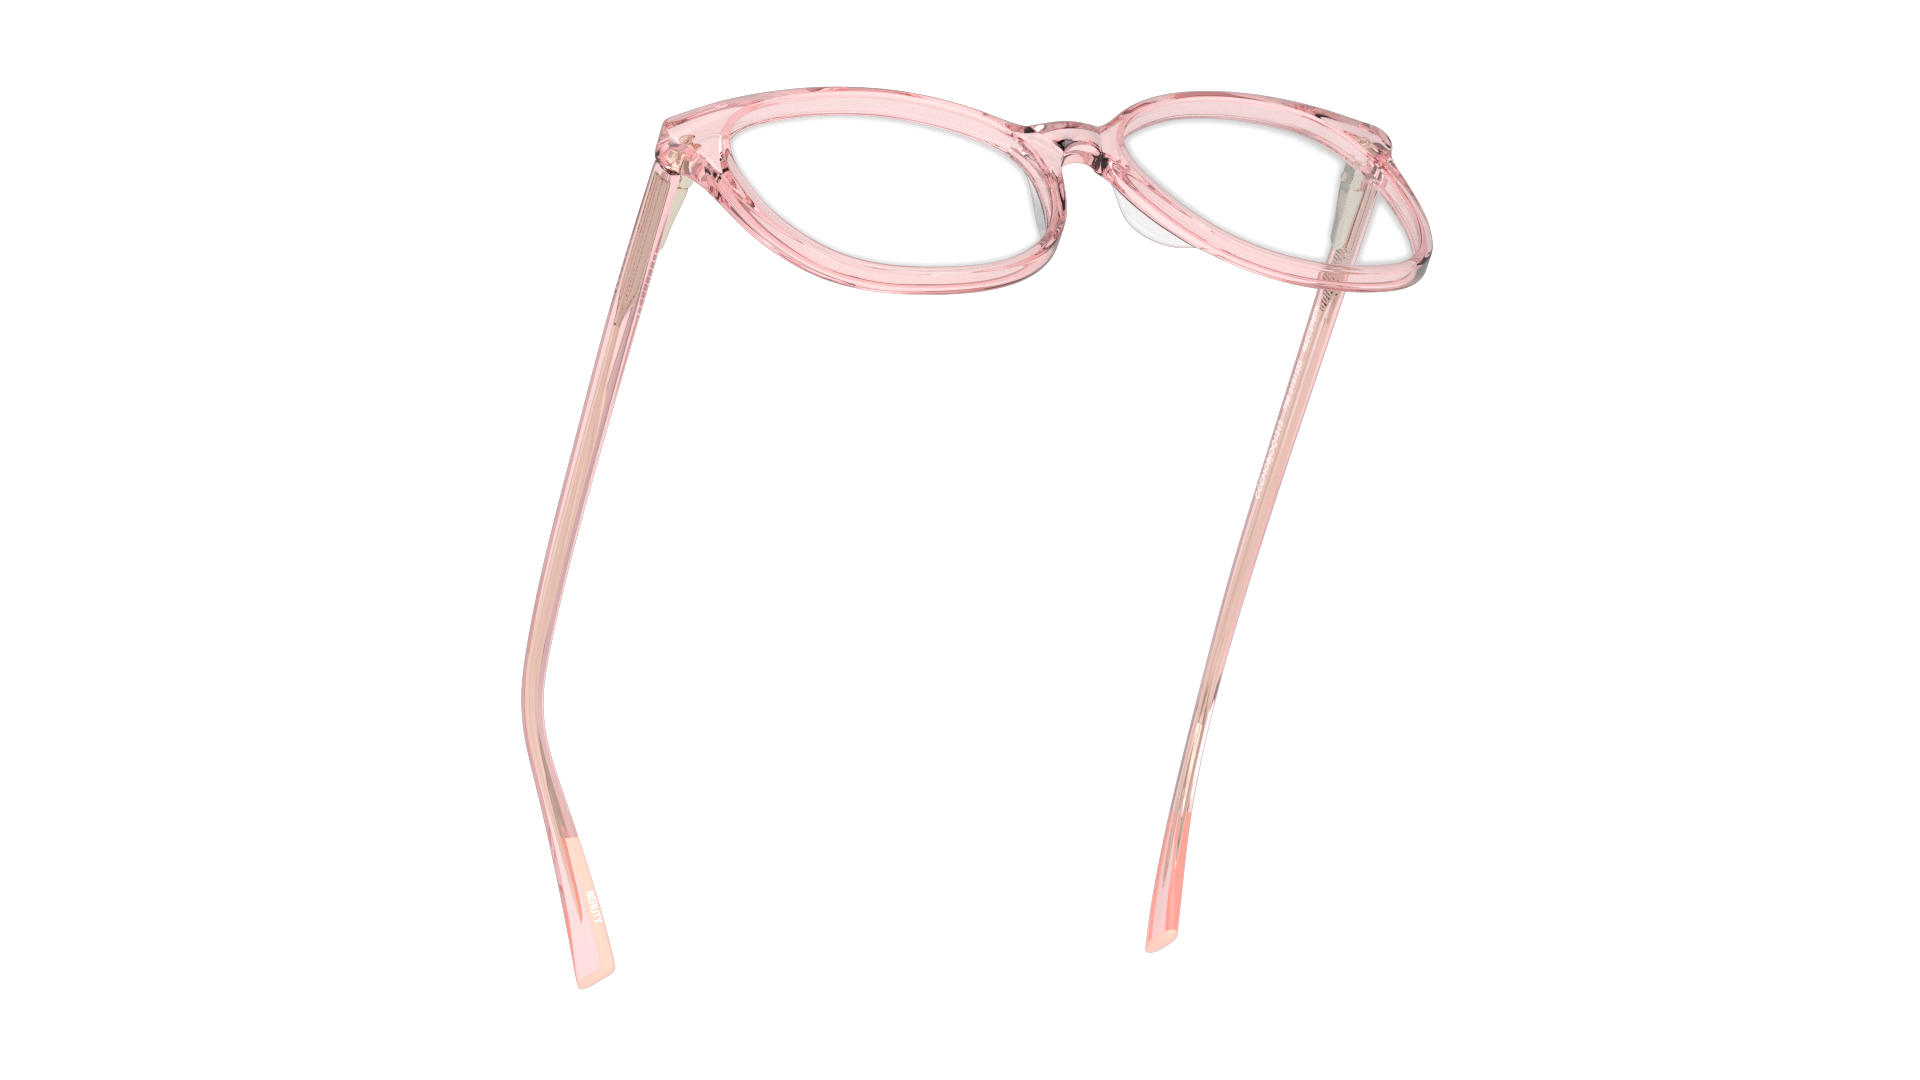 Bottom_Up Unofficial UNOF0002 Glasses Transparent / Pink